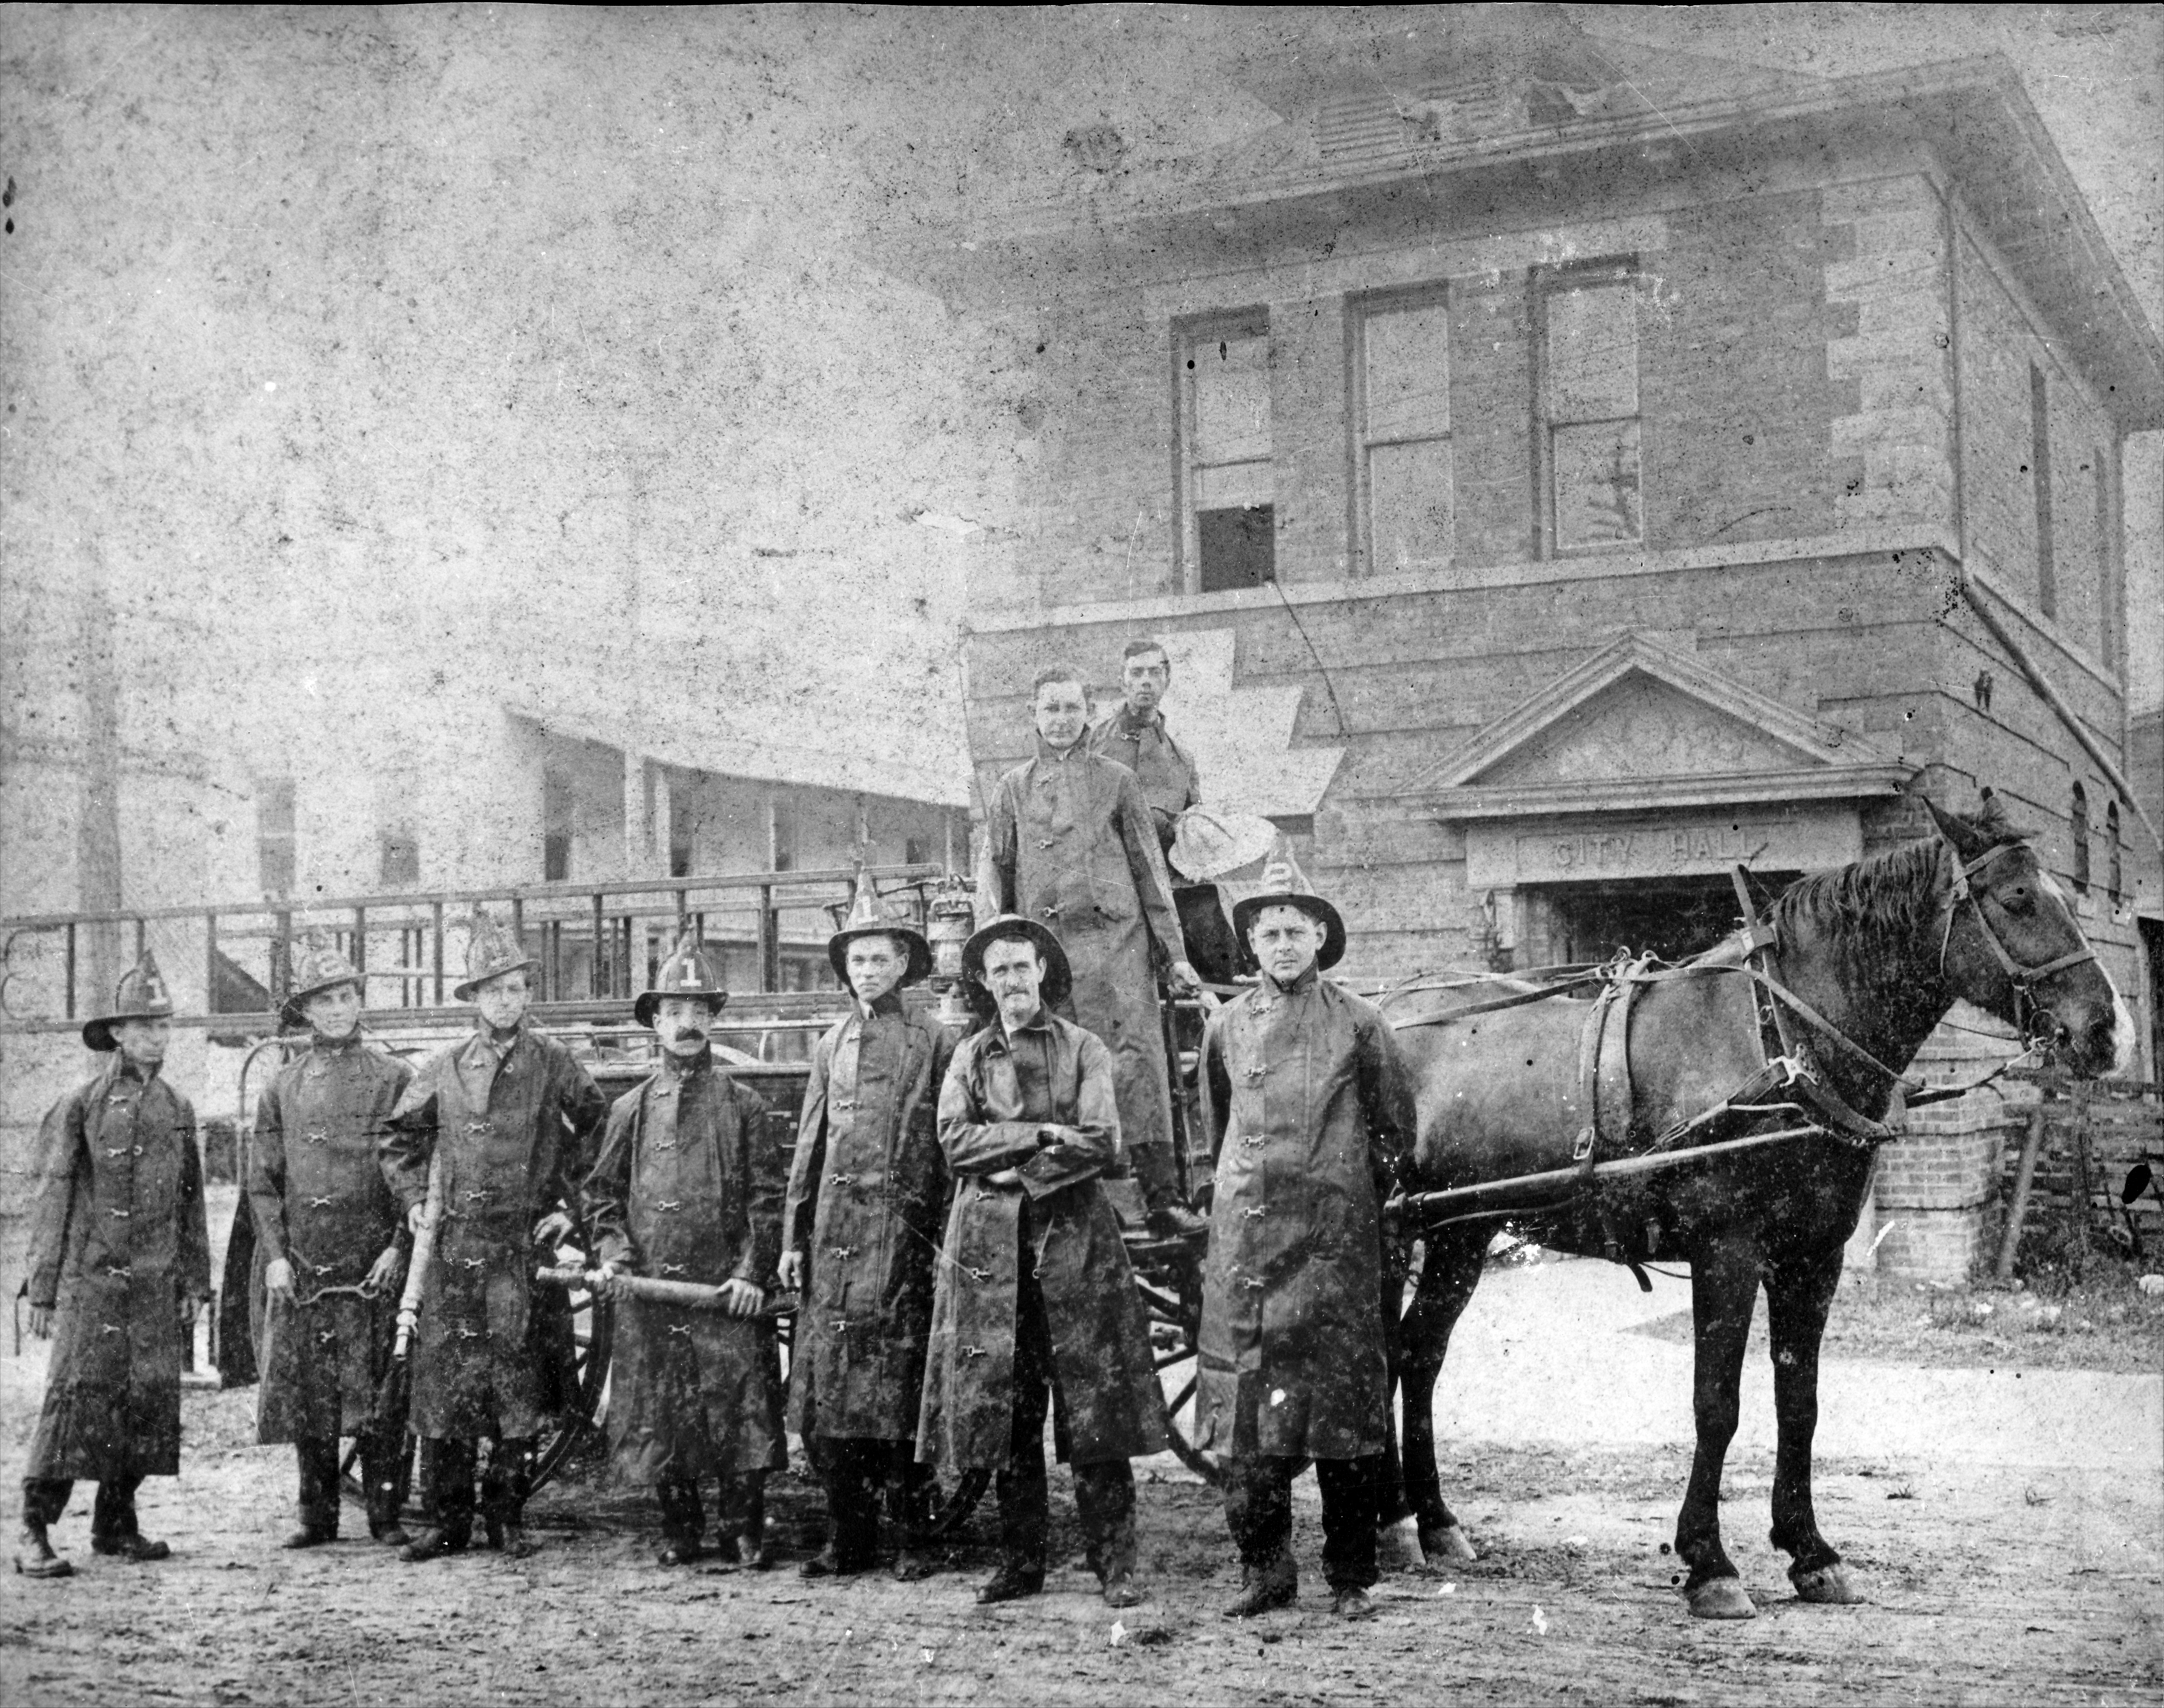 A picture of volunteer Lakeland firefighters, circa 1903